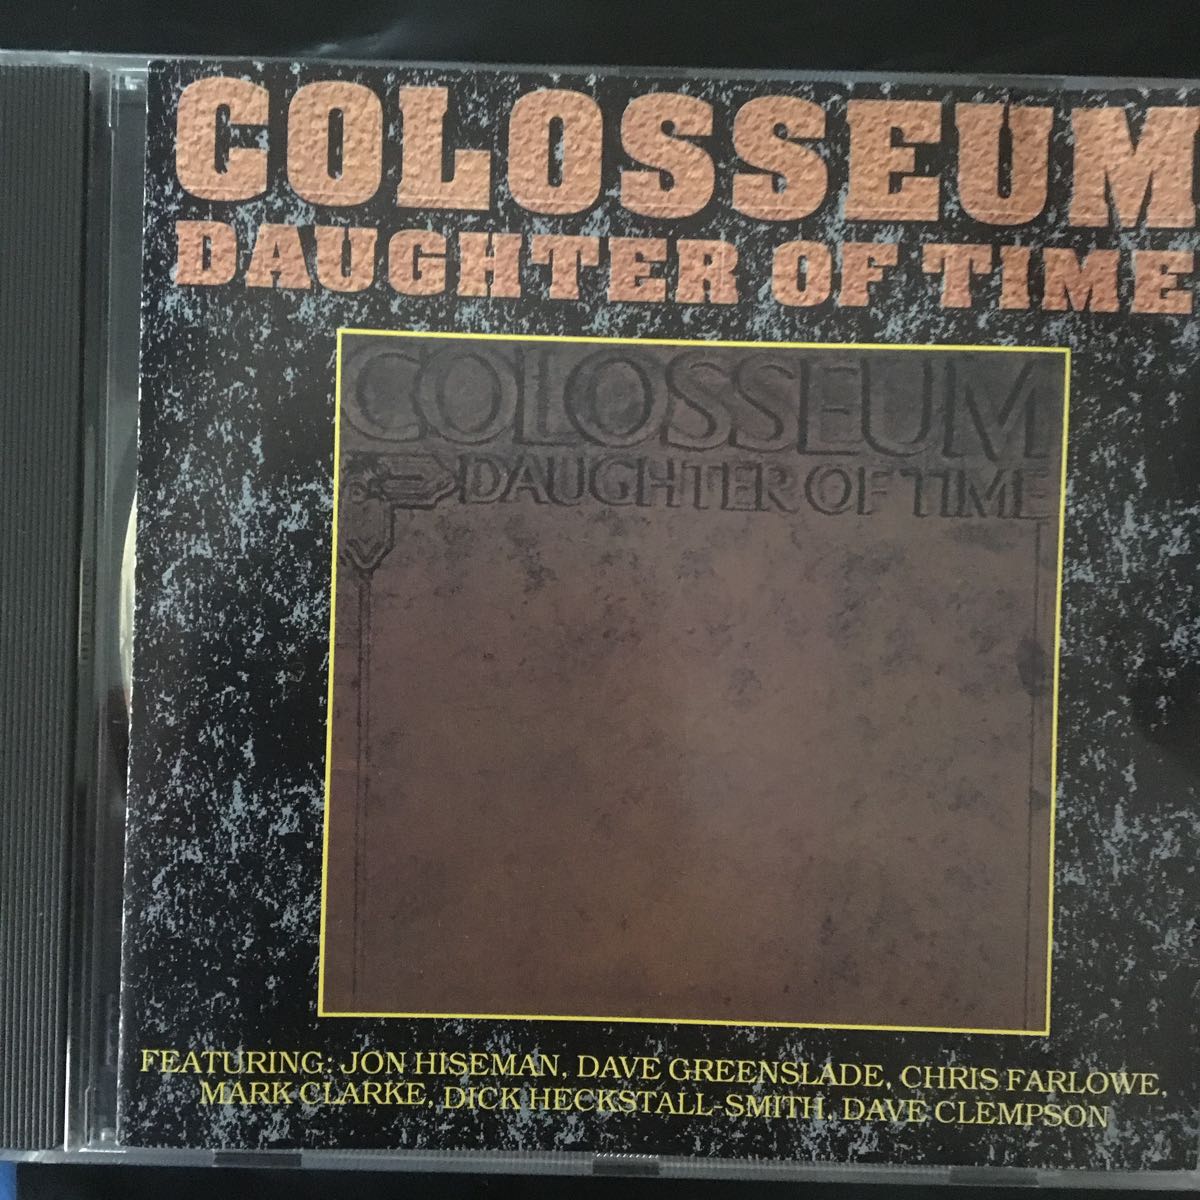 Colosseum Daughter of Time_画像1